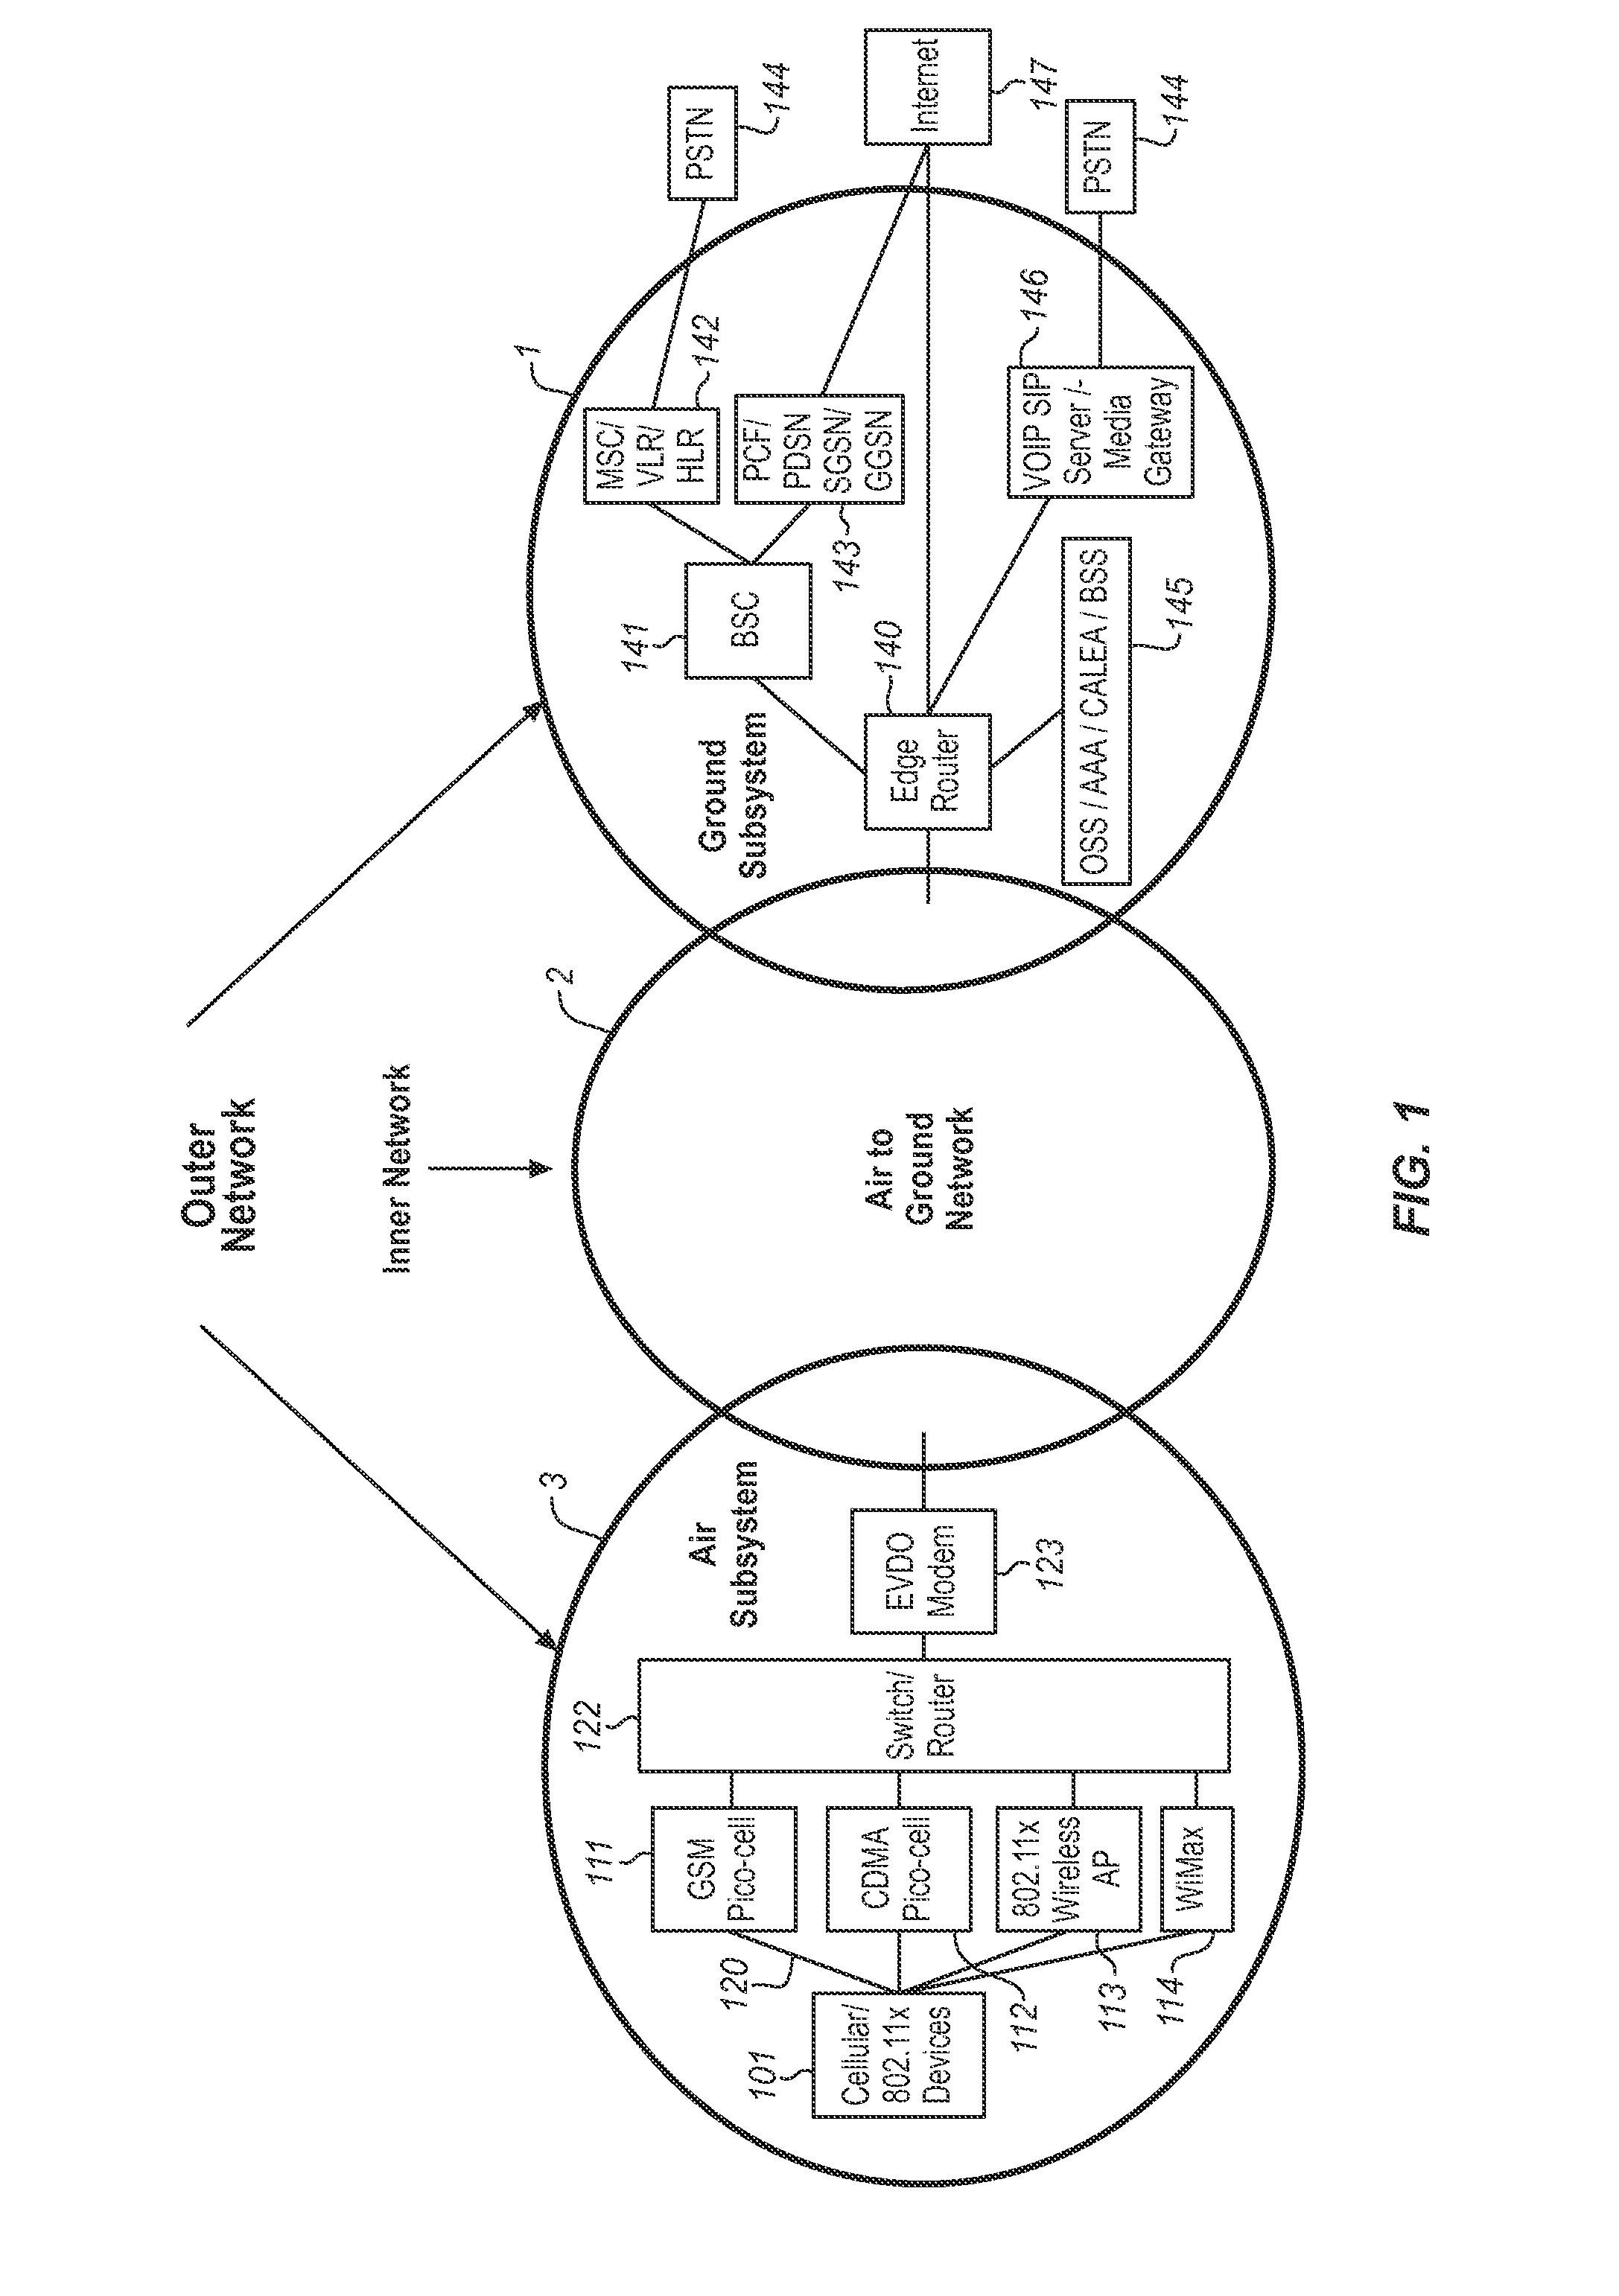 System for managing mobile internet protocol addresses in an airborne wireless cellular network